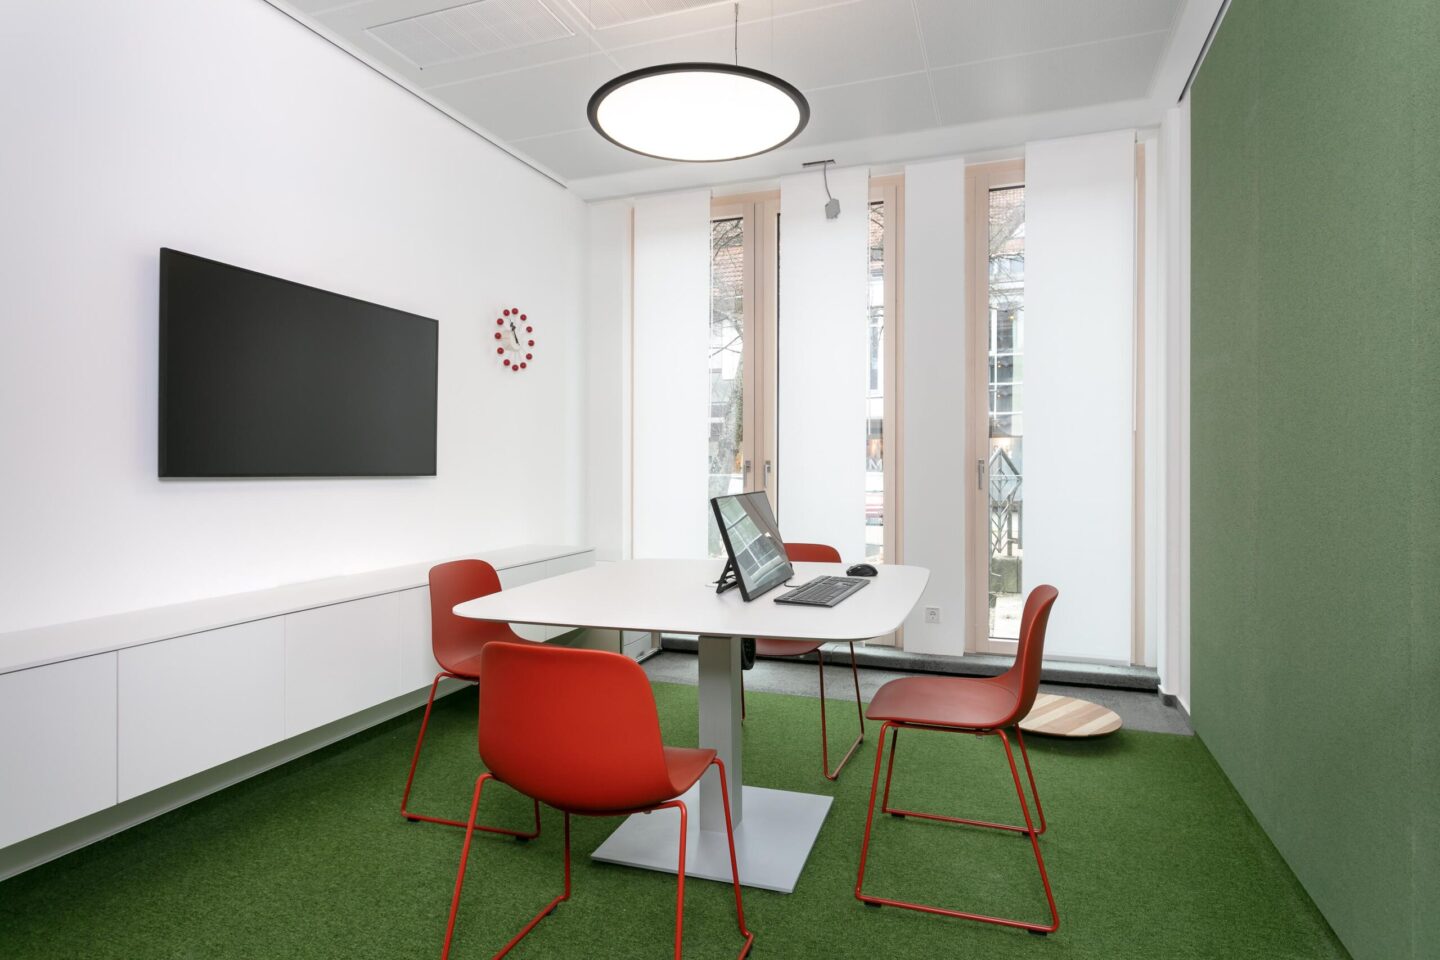 Sparkasse Bühl – Main Office │ room concepts │ modern meeting rooms